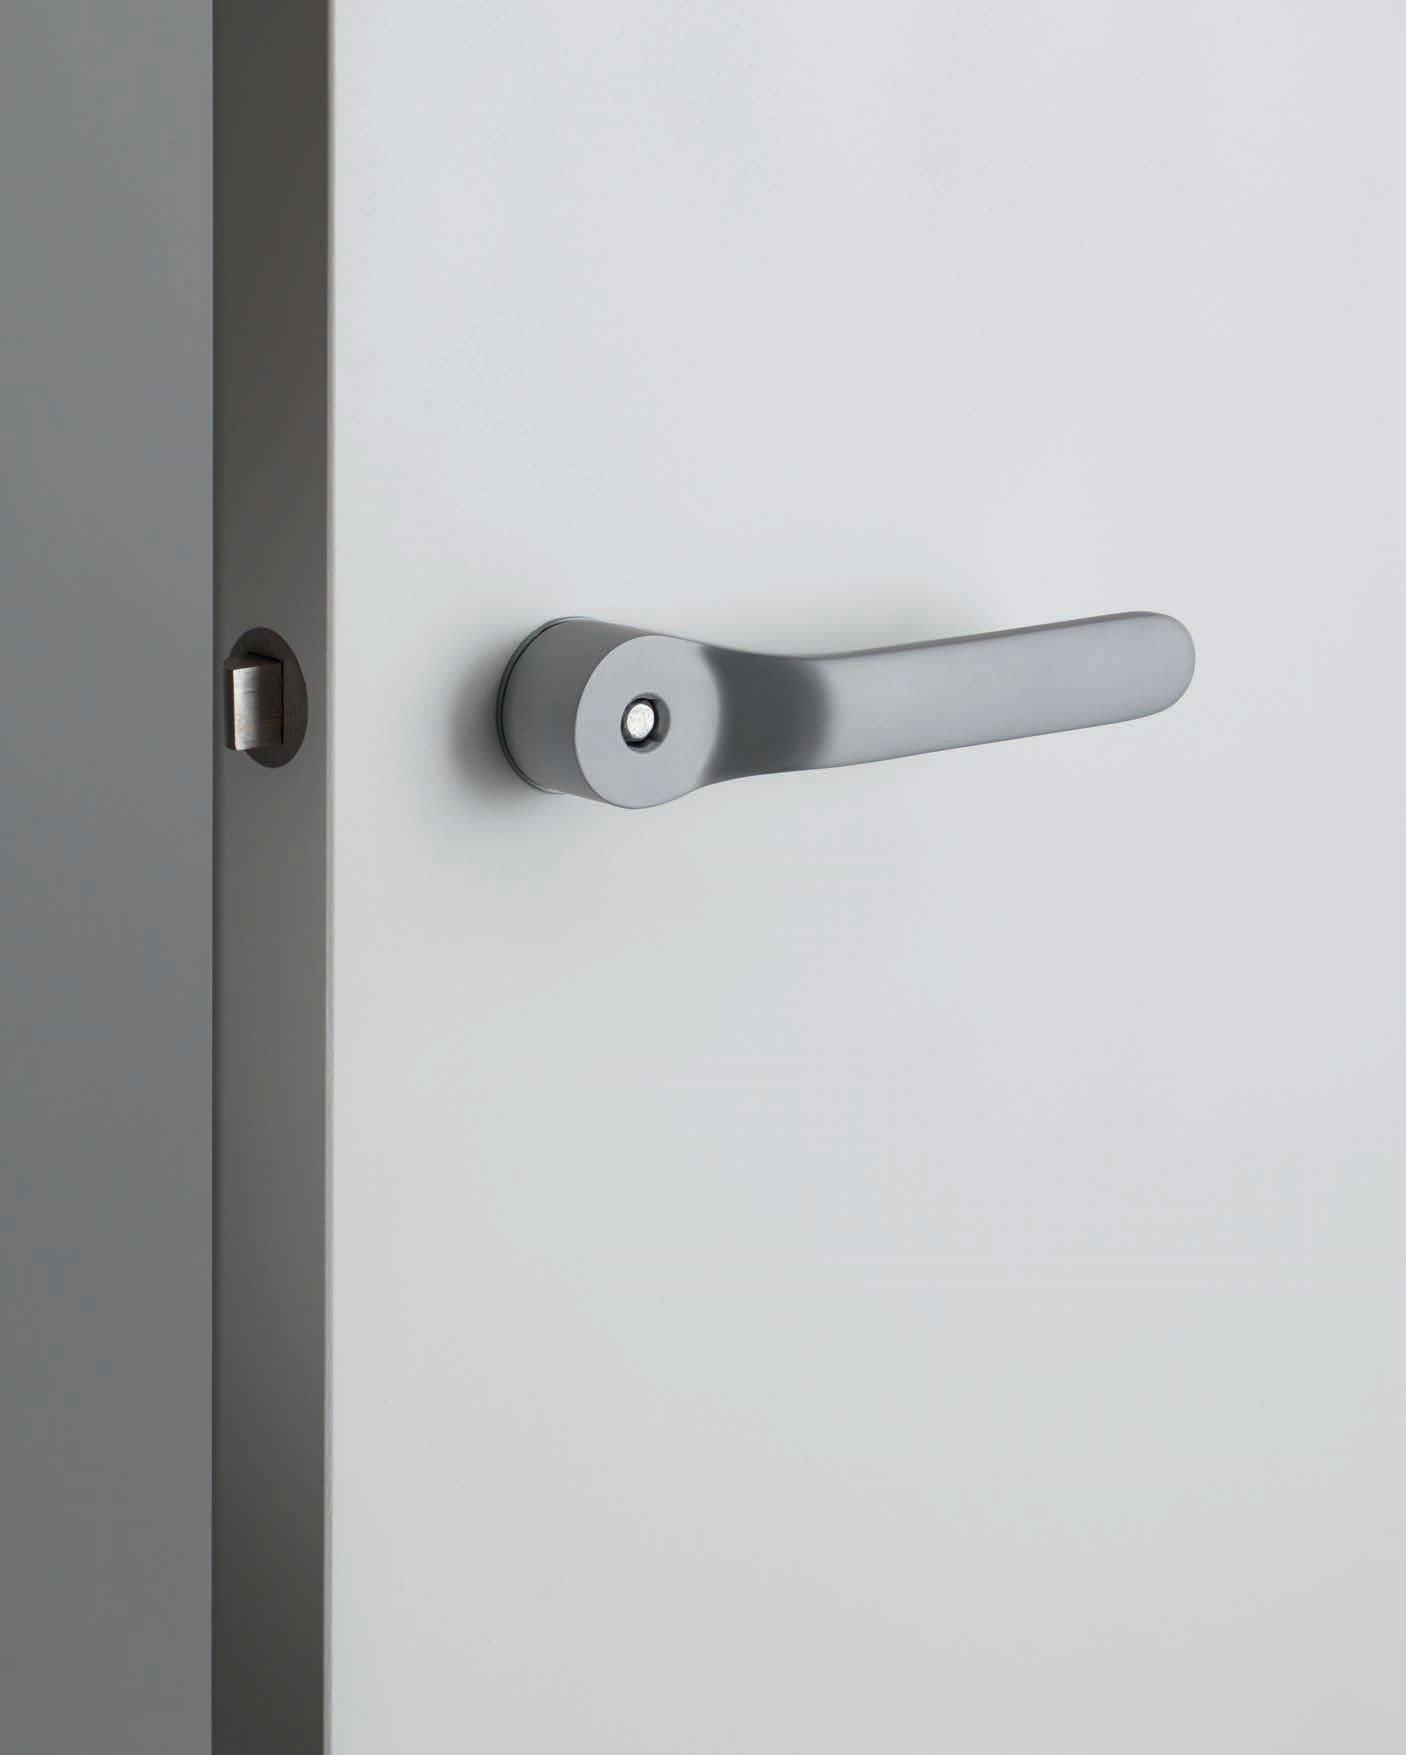 The wrench that inspired Industrial Facility's door handle | Design ...